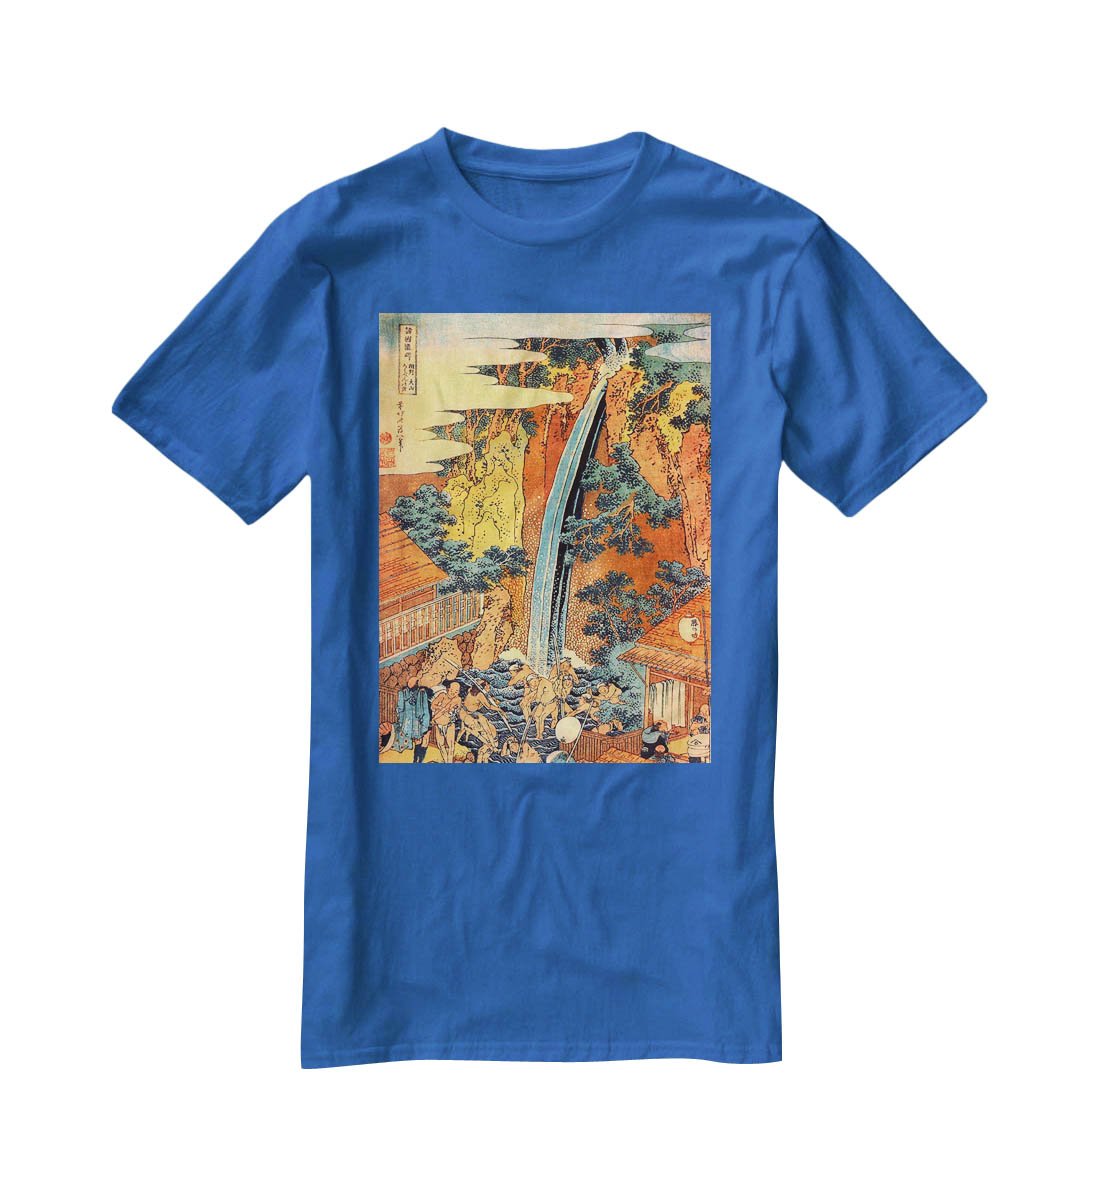 Waterfalls in all provinces 2 by Hokusai T-Shirt - Canvas Art Rocks - 2